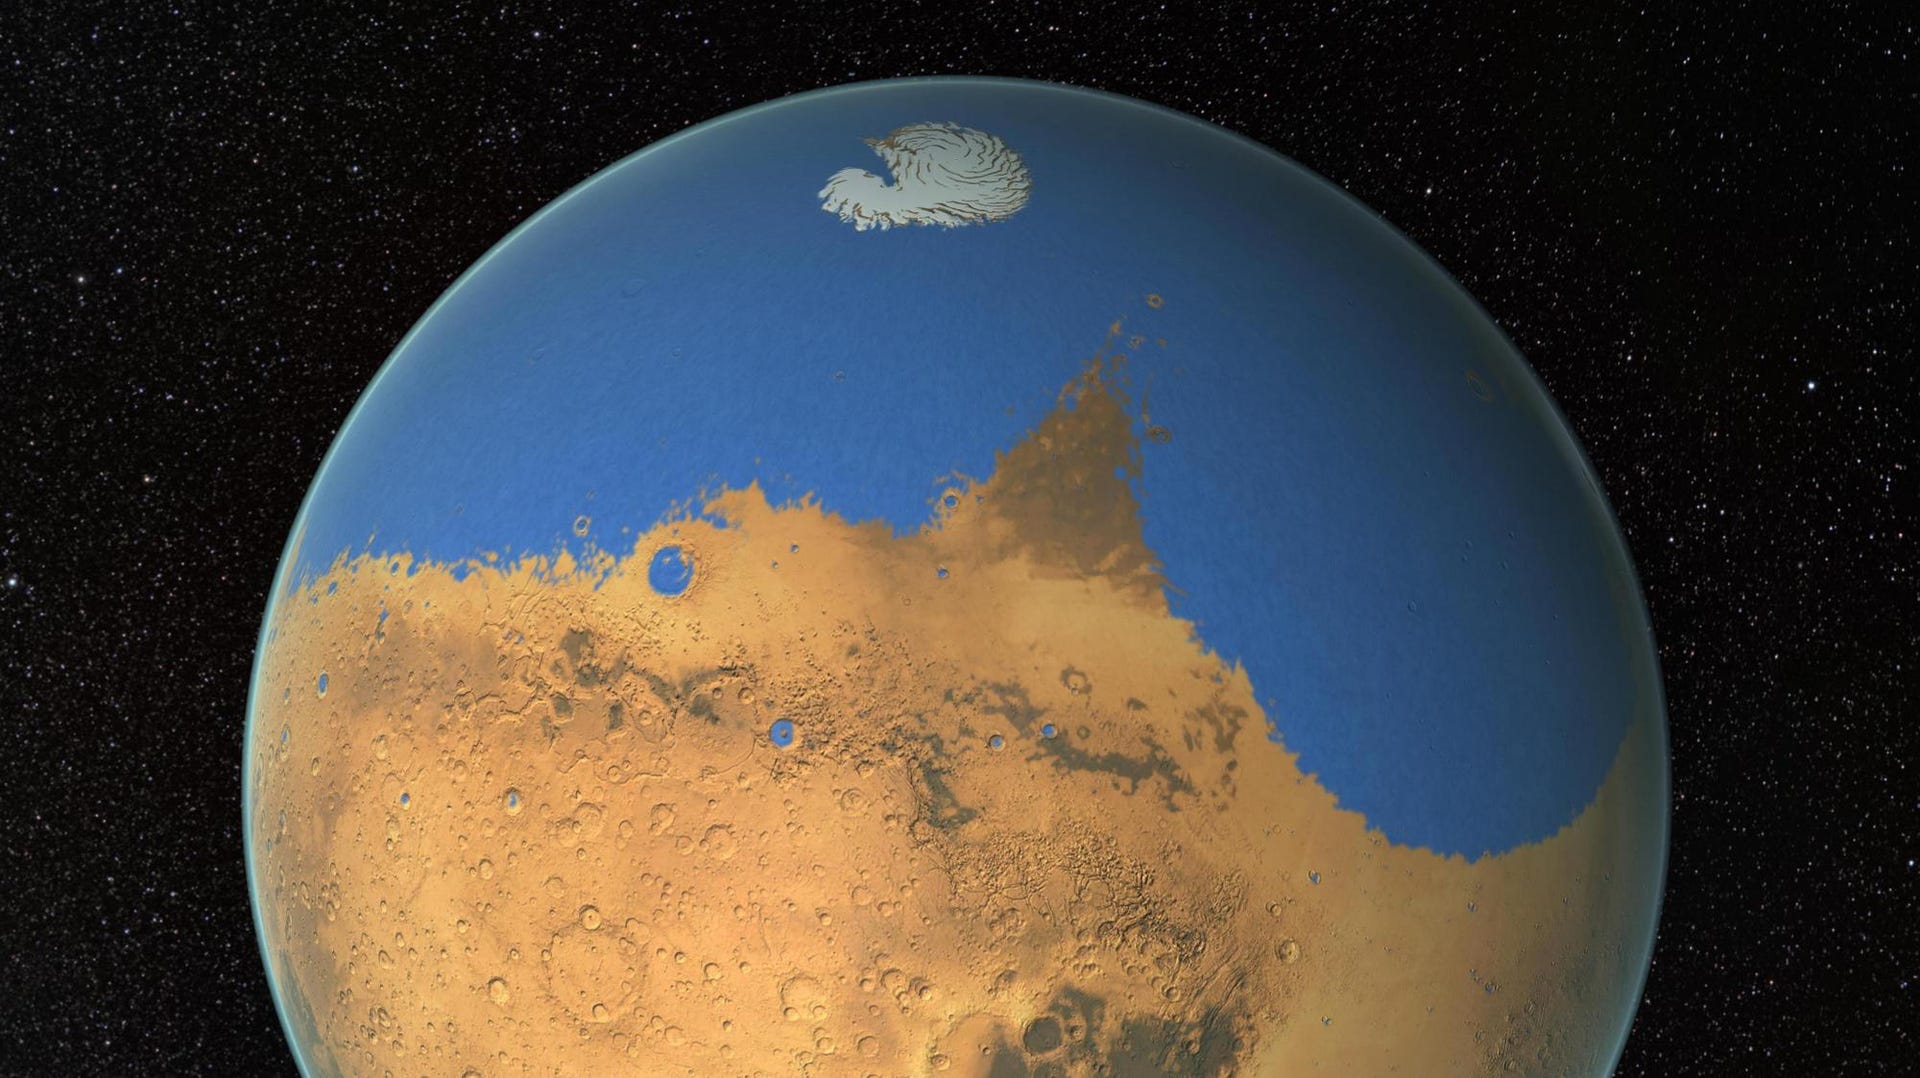 Illustration of reddish Mars with a big splash of a blue ocean across the top of the planet.